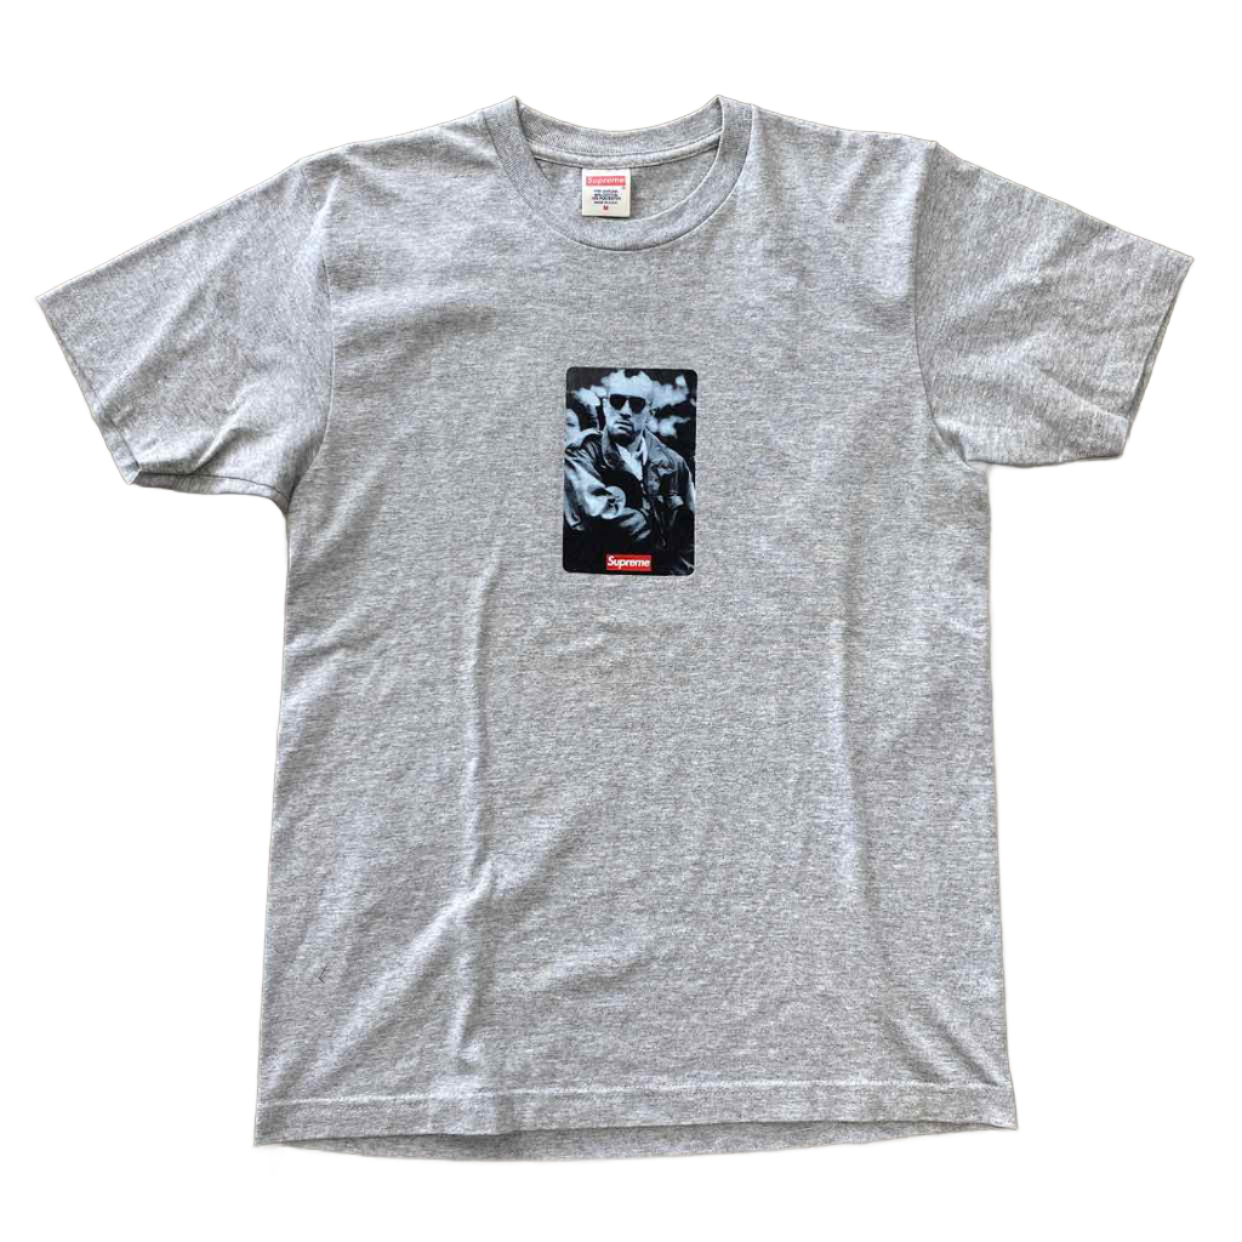 Supreme T-Shirt &quot;TAXI&quot; Grey Used Size M